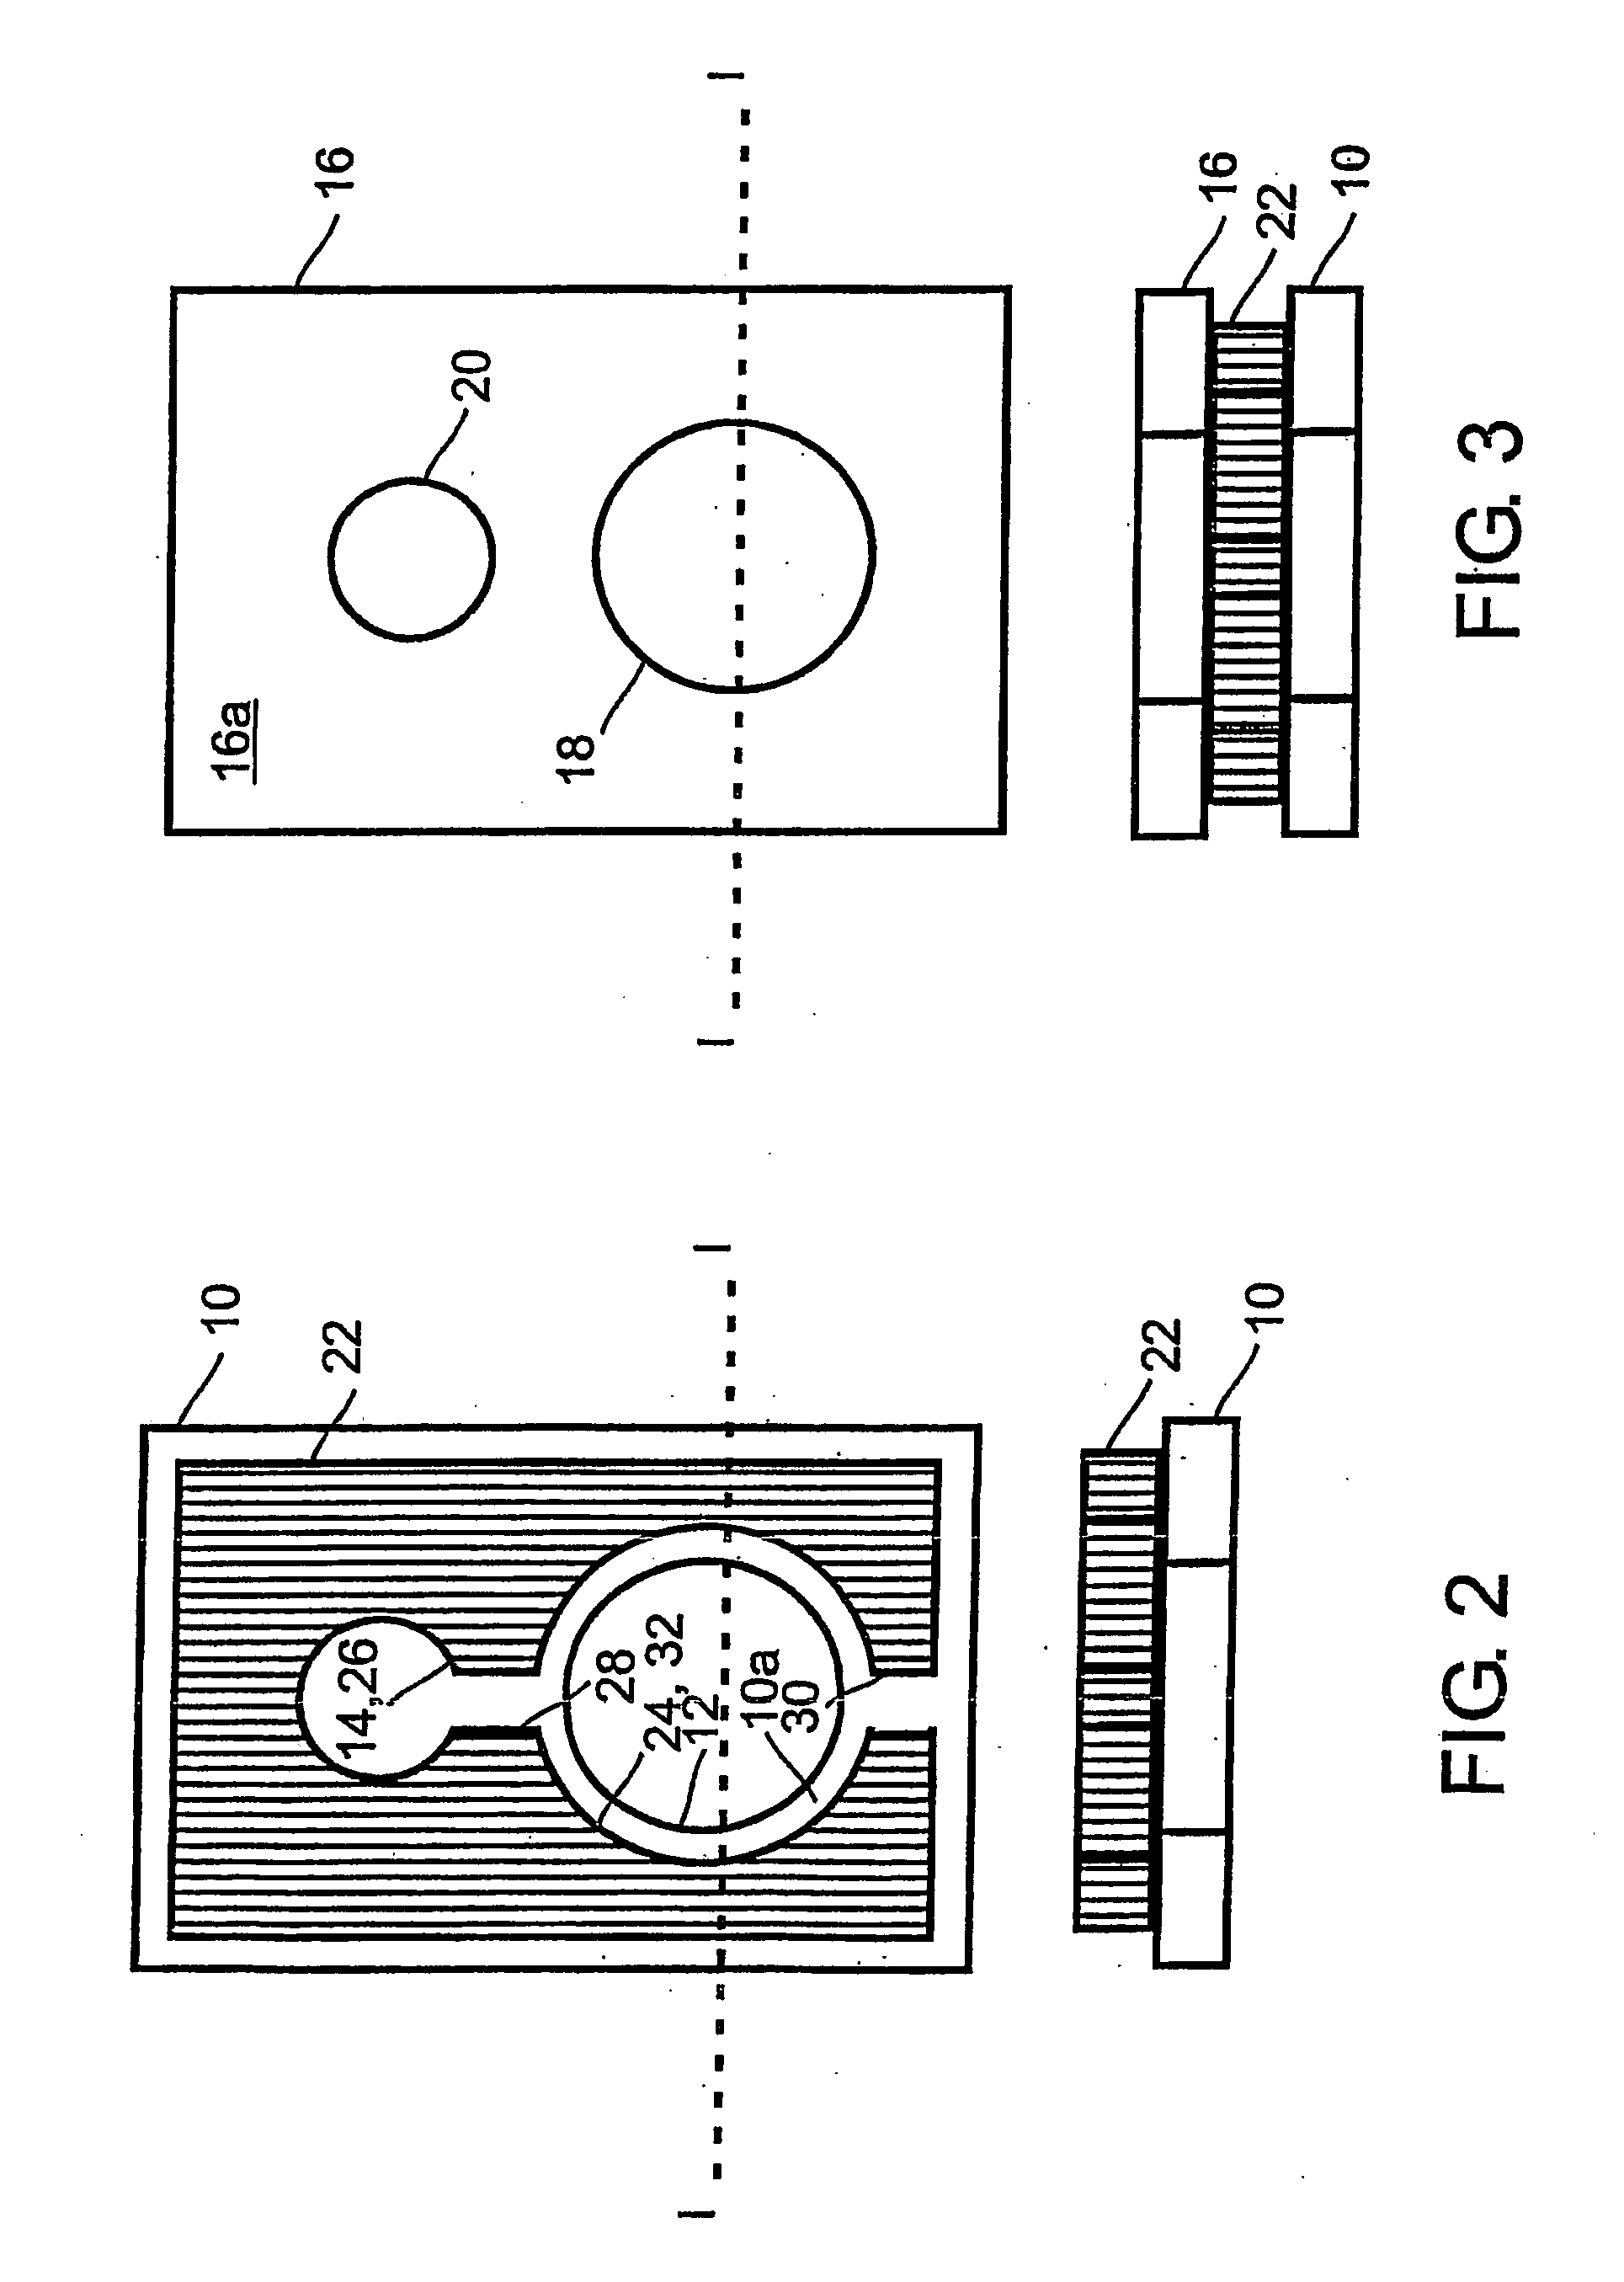 Method for Producing a Fuel Cell Stack